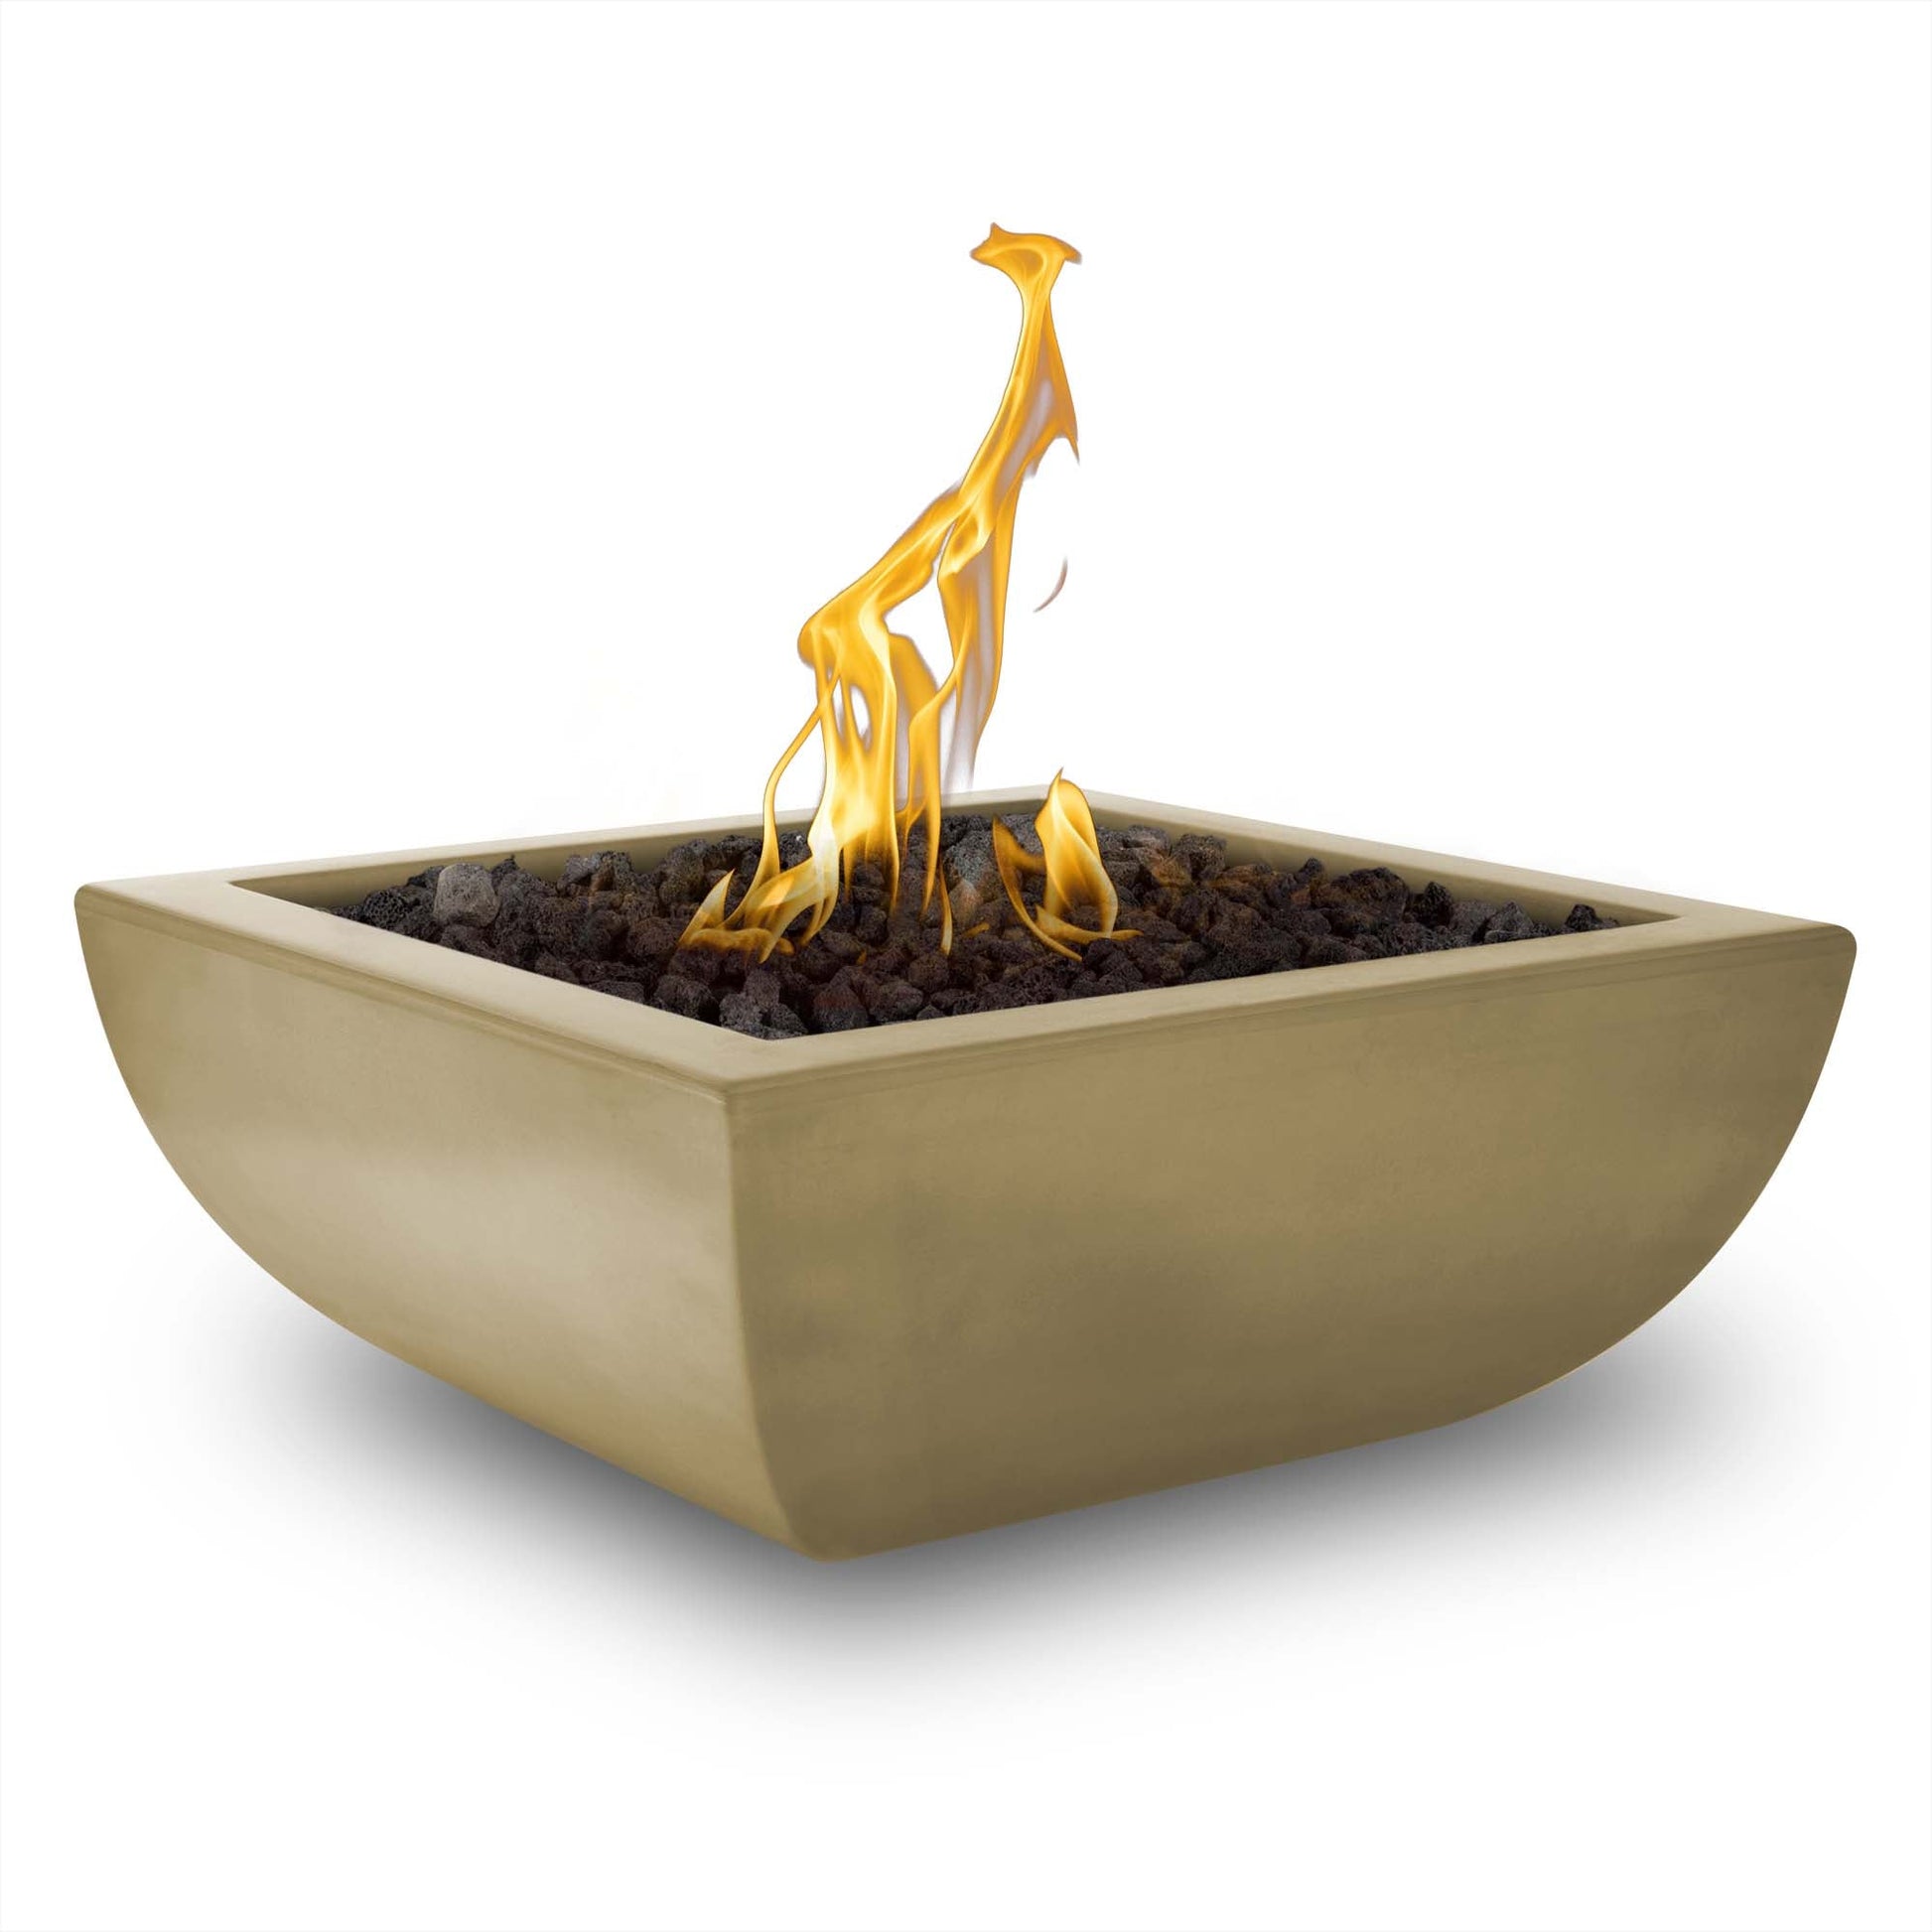 The Outdoor Plus Square Avalon 30" White GFRC Concrete Natural Gas Fire Bowl with Match Lit with Flame Sense Ignition